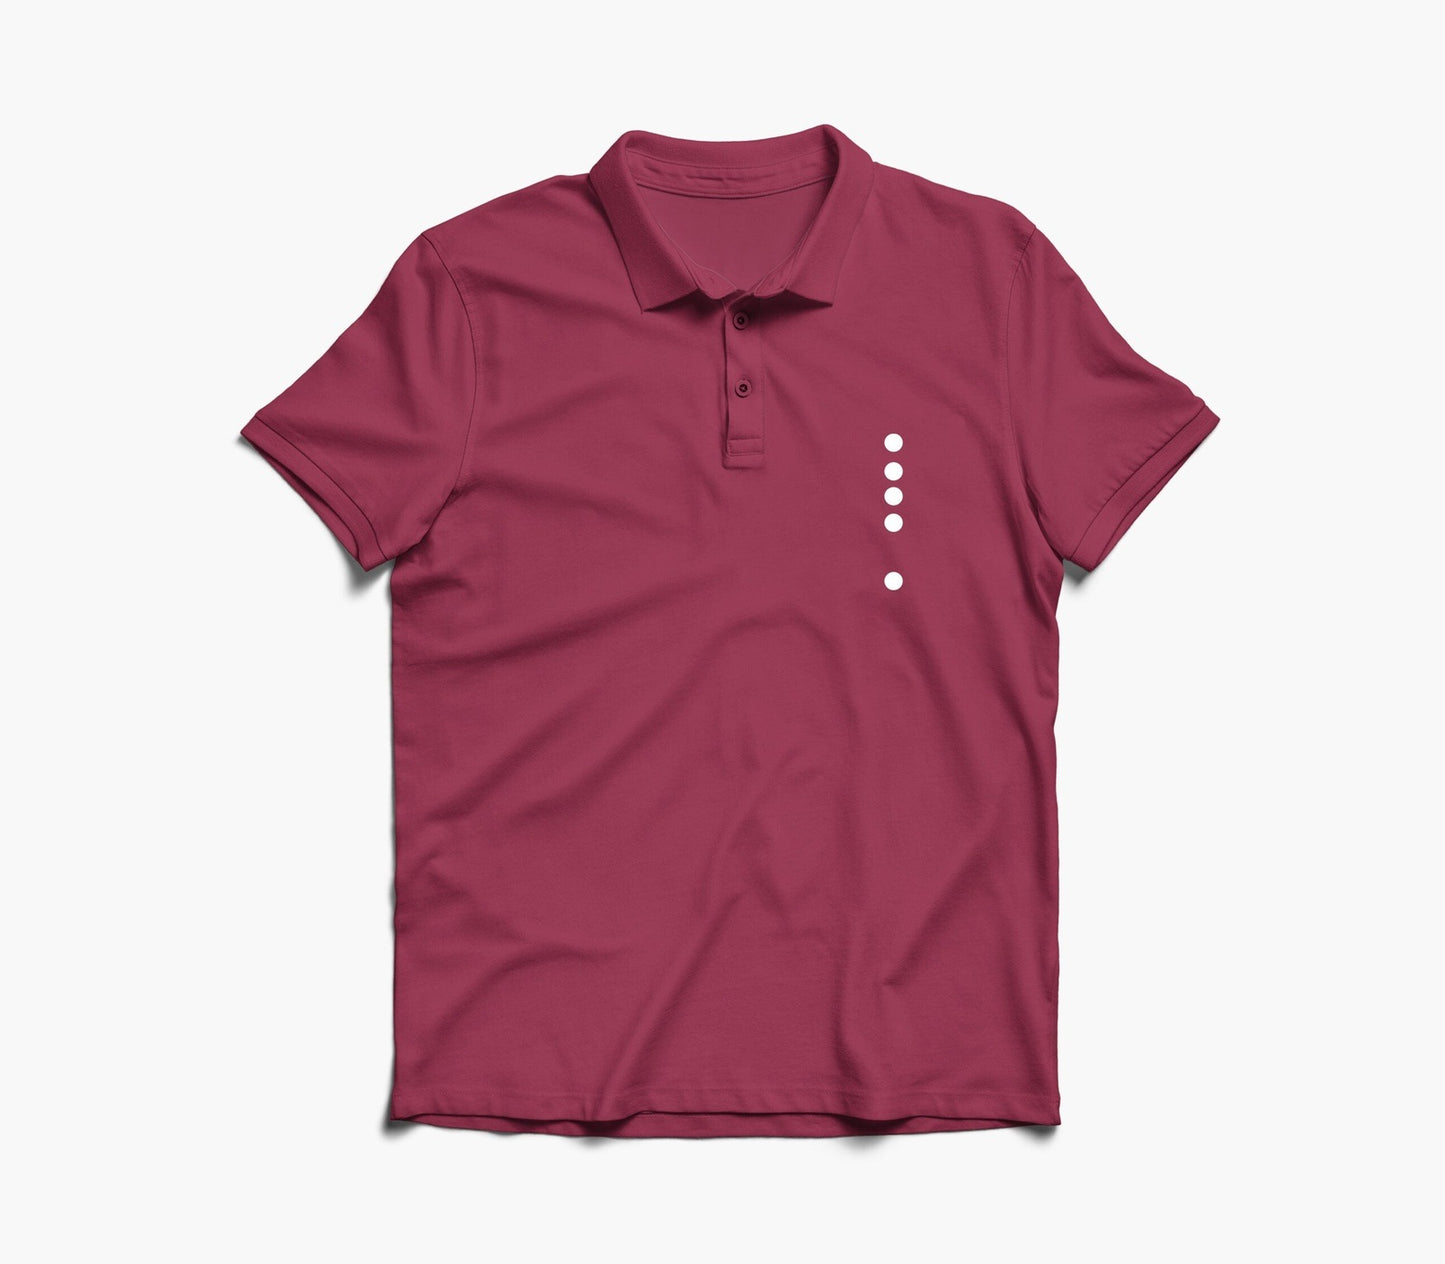 Four Dots Graphic Polo Shirt